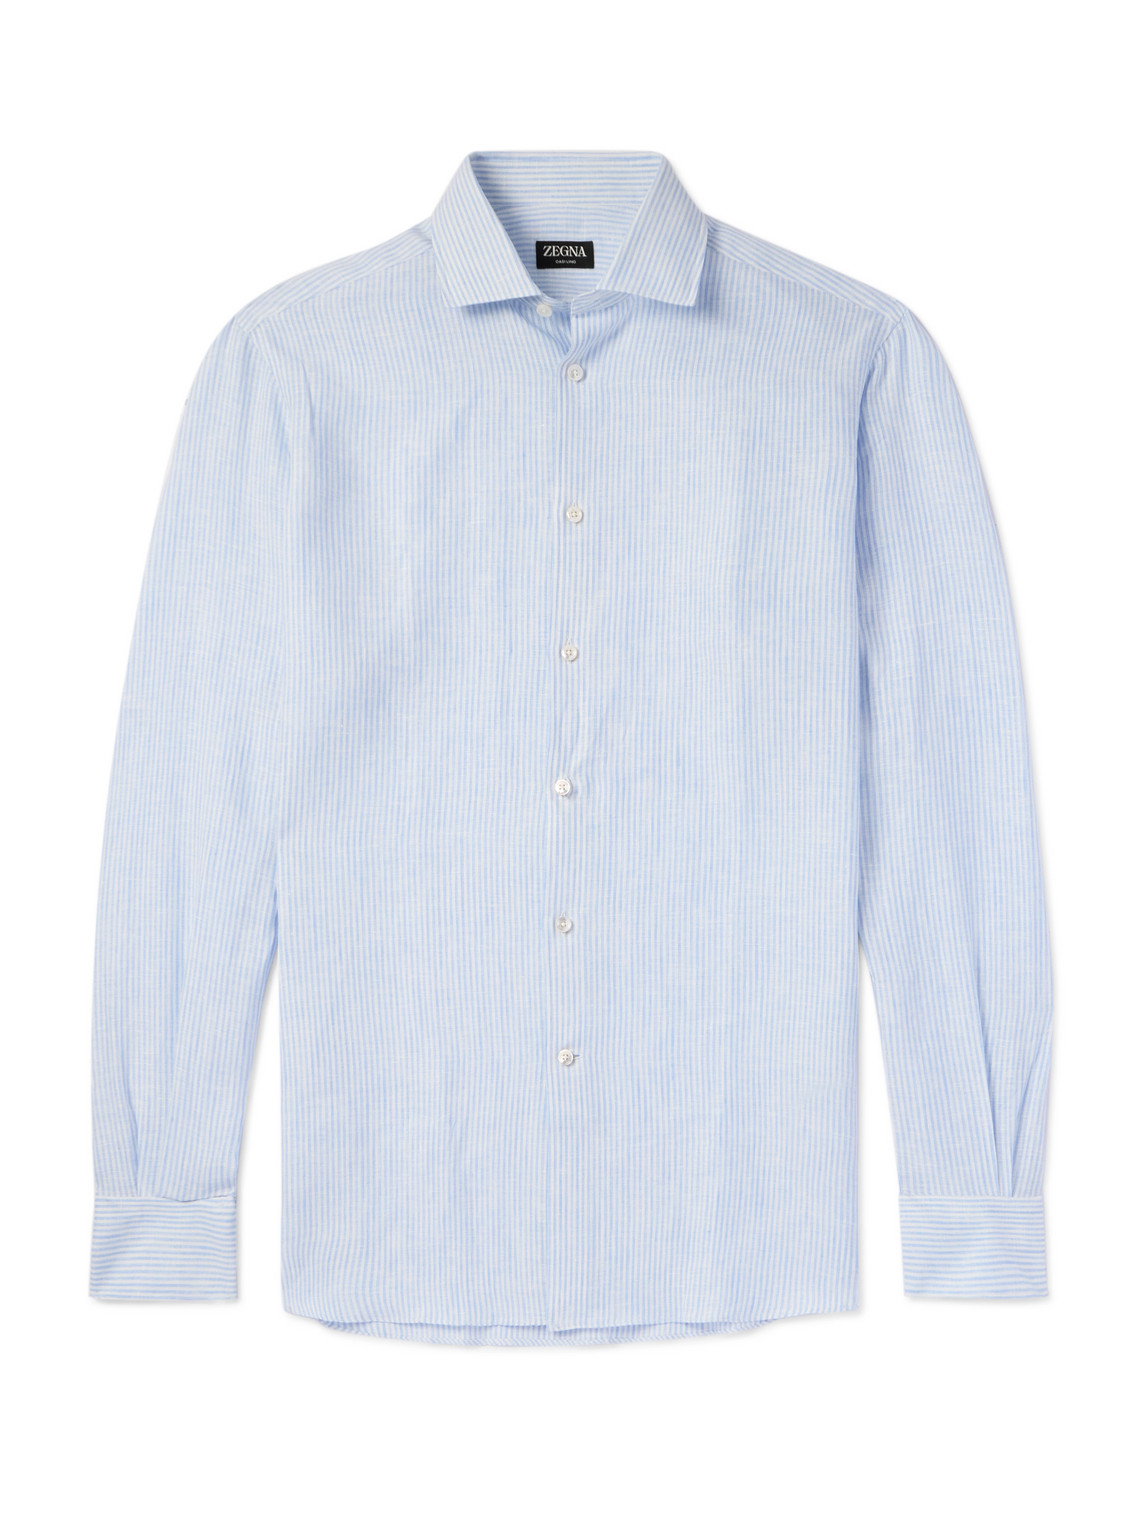 Zegna Oasi Striped Linen Shirt In Unknown